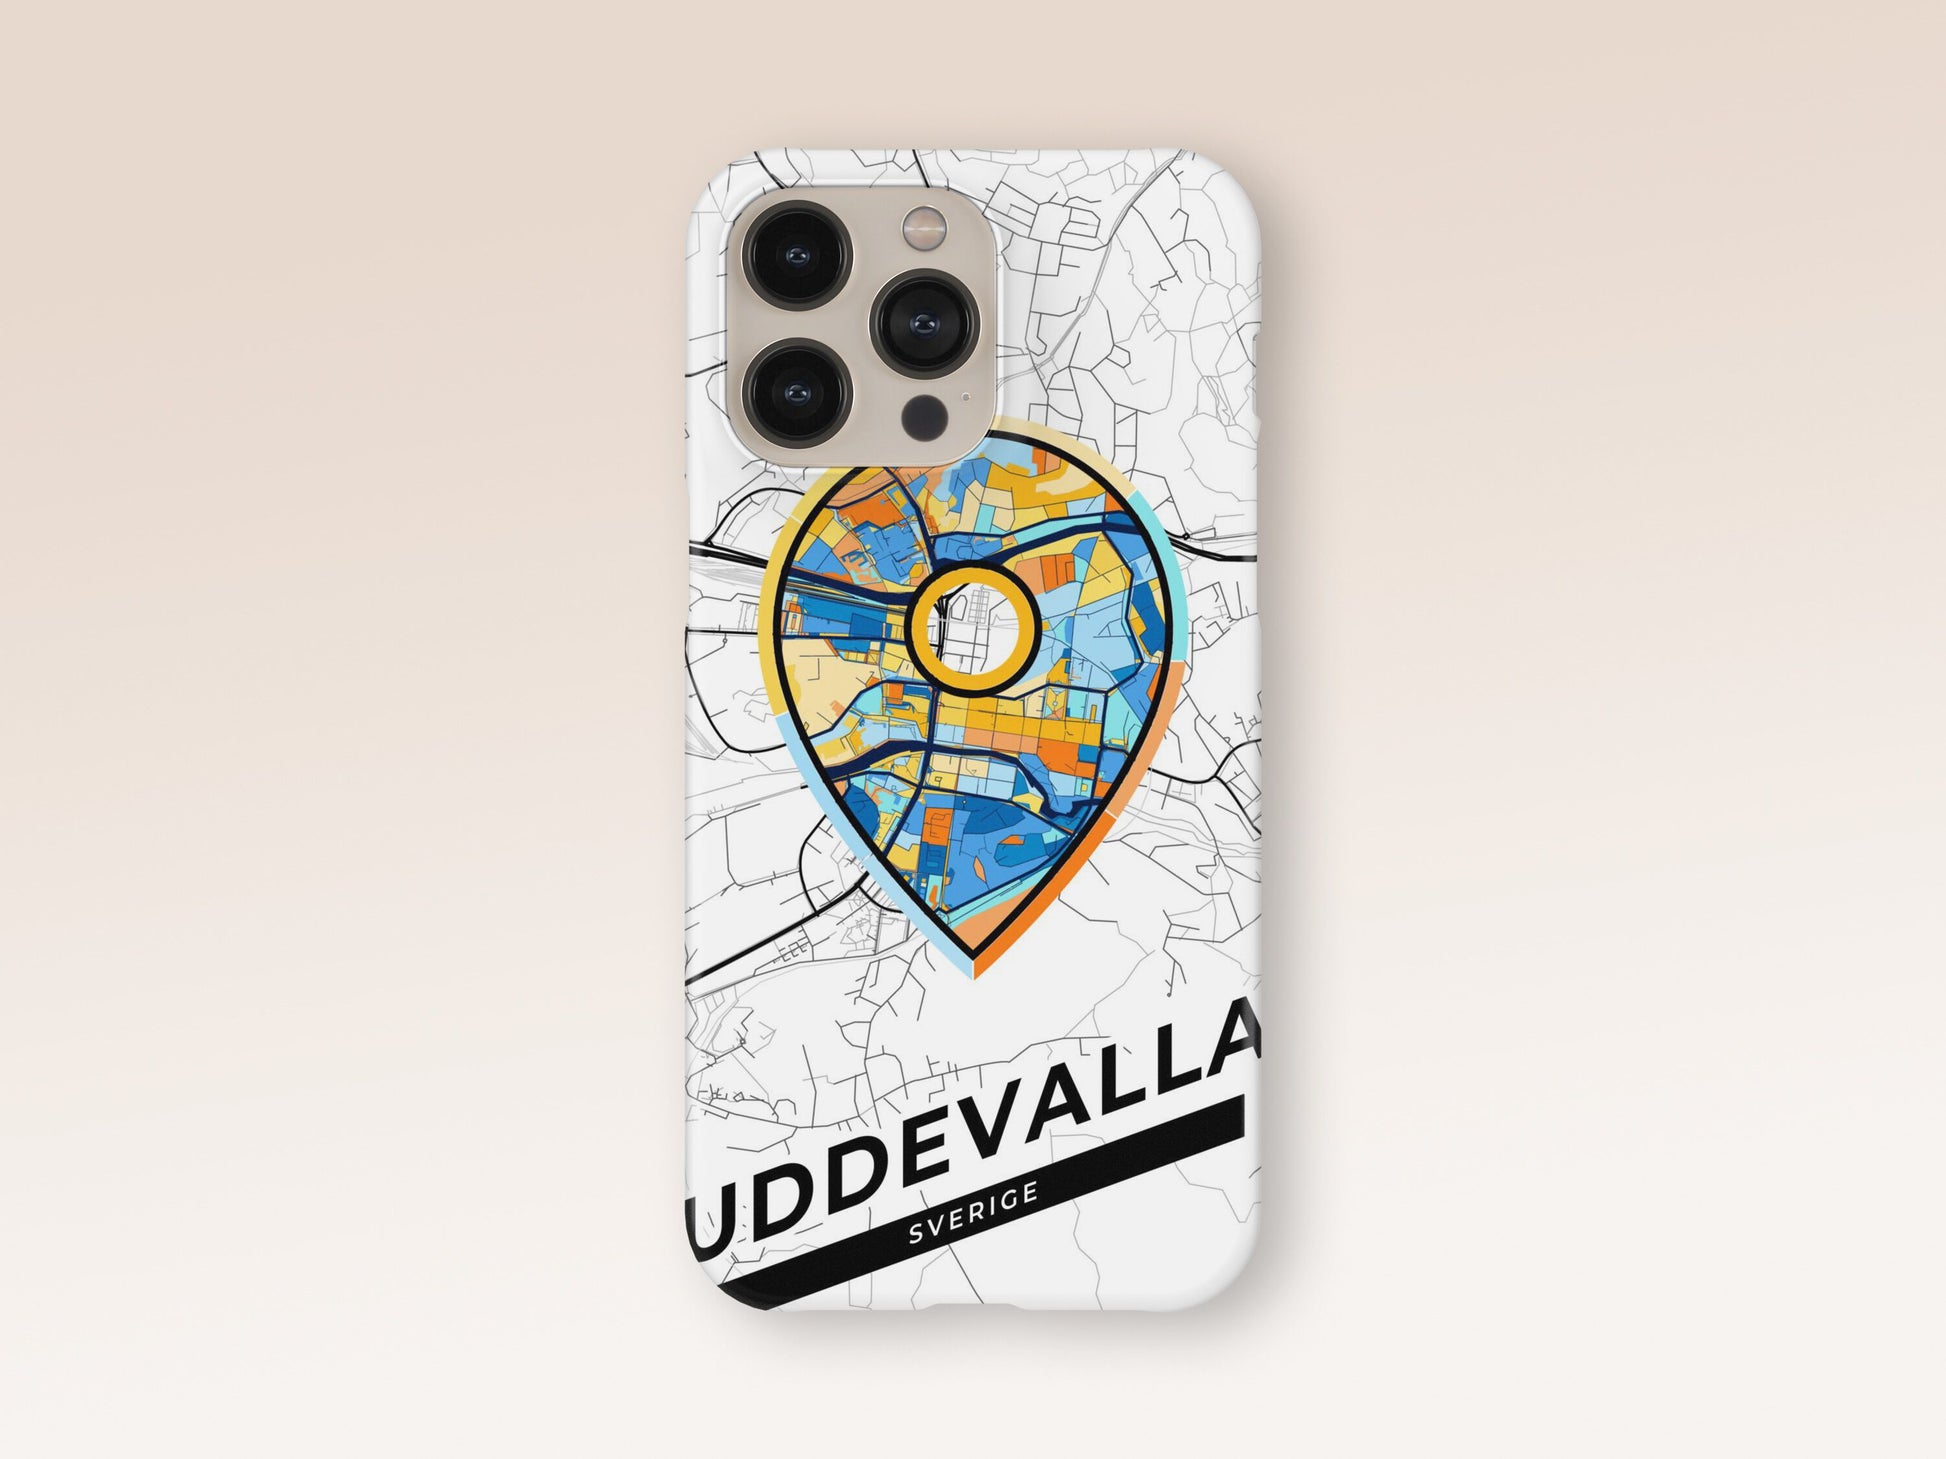 Uddevalla Sweden slim phone case with colorful icon. Birthday, wedding or housewarming gift. Couple match cases. 1